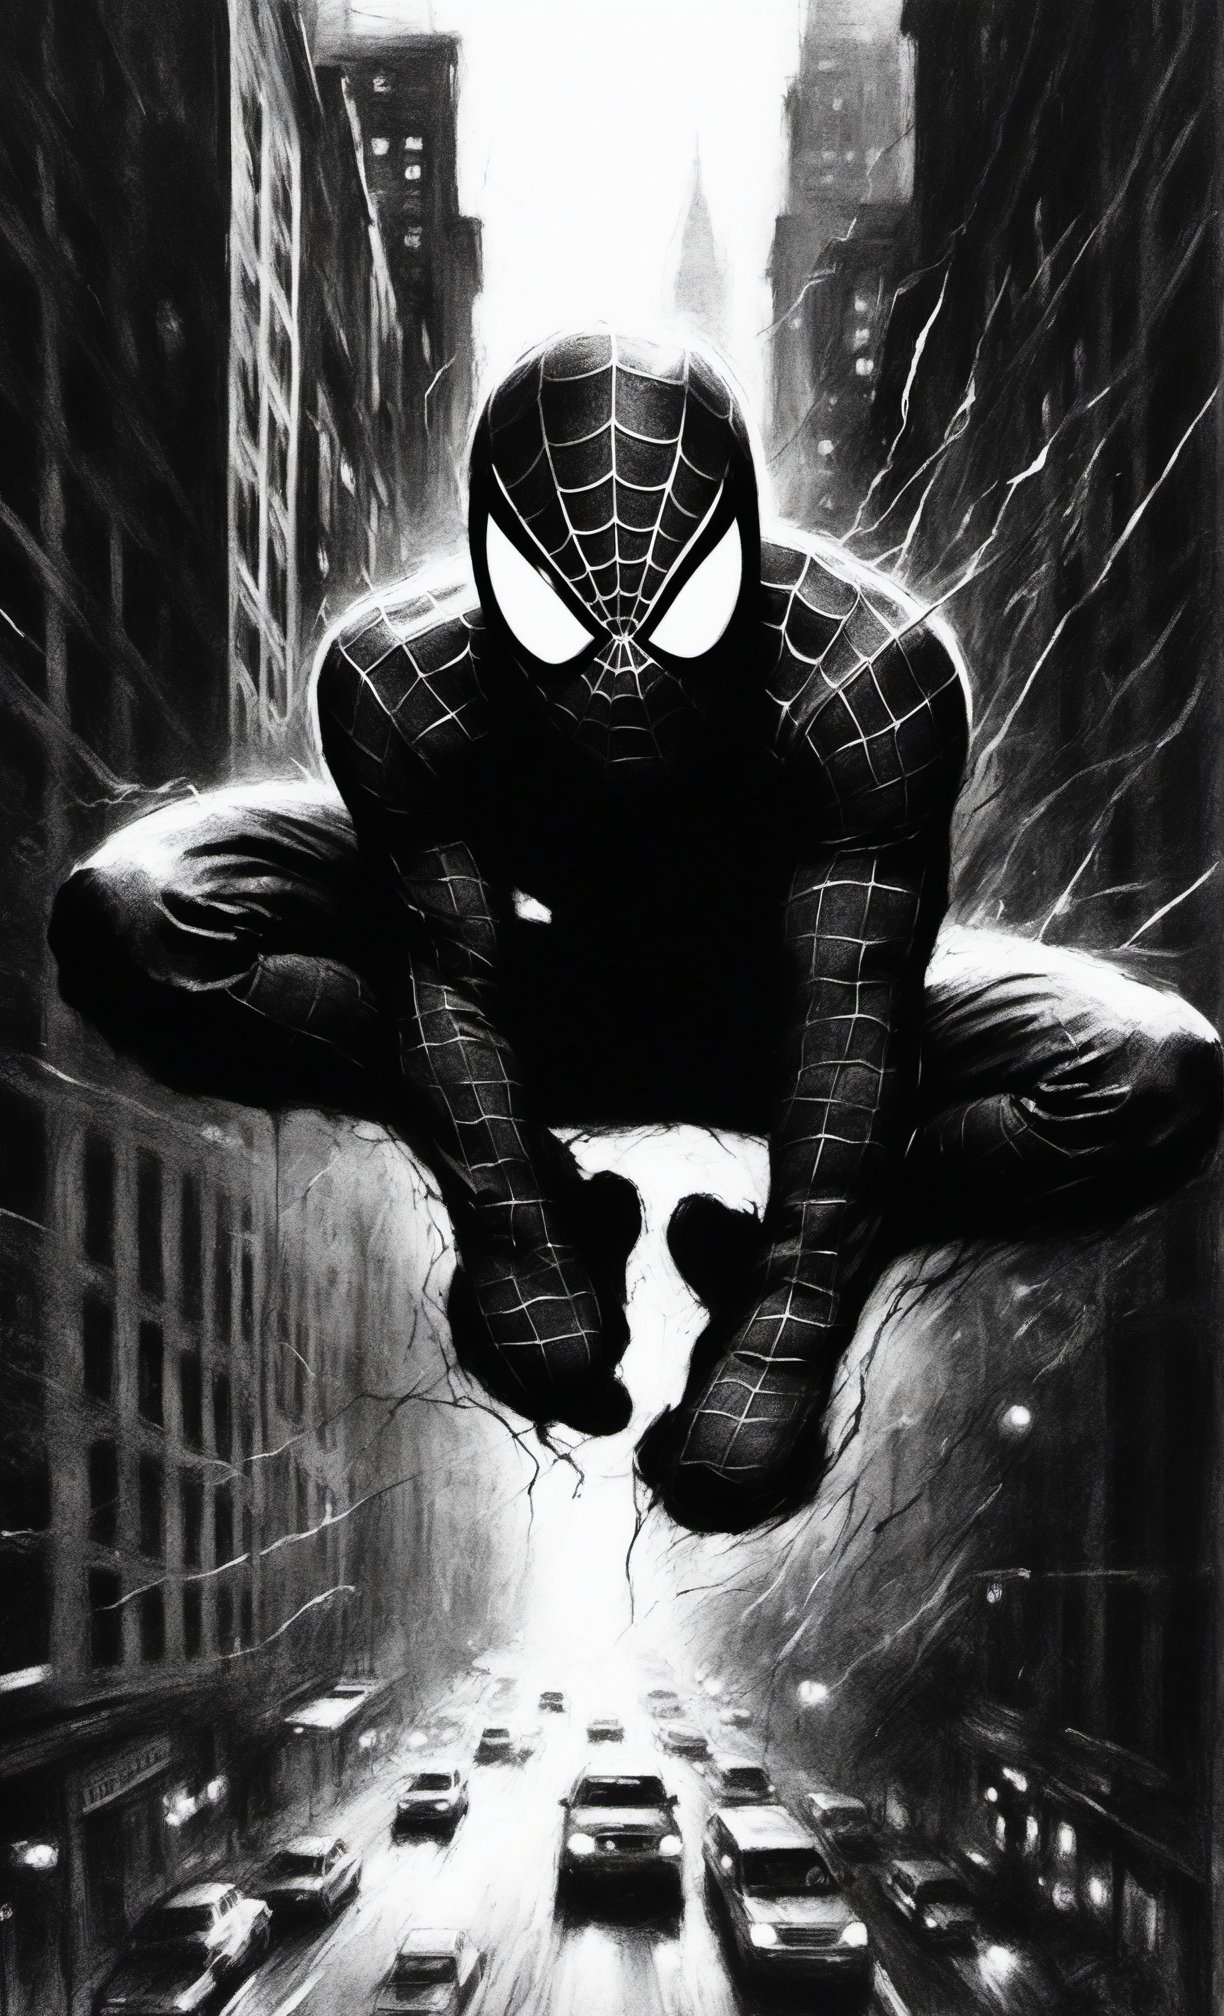 score_9, score_8_up, score_7_up, score_6_up, CharcoalDarkStyle, New York City, facing fears, splashes of dark black to faint light grey, Tom McFarlane, Urban Comics, lost, solo, Spiderman swinging from the sky, with combat weathered suit,, source_anime, Poorly_lit, Dark, Shadows, sadness, confusion, depravade, crawling, begging the skies for help, dark, sketch, drawn with charcoal, monochrome, black and white, (Masterpiece:1.3) (best quality:1.2) (high quality:1.1) 